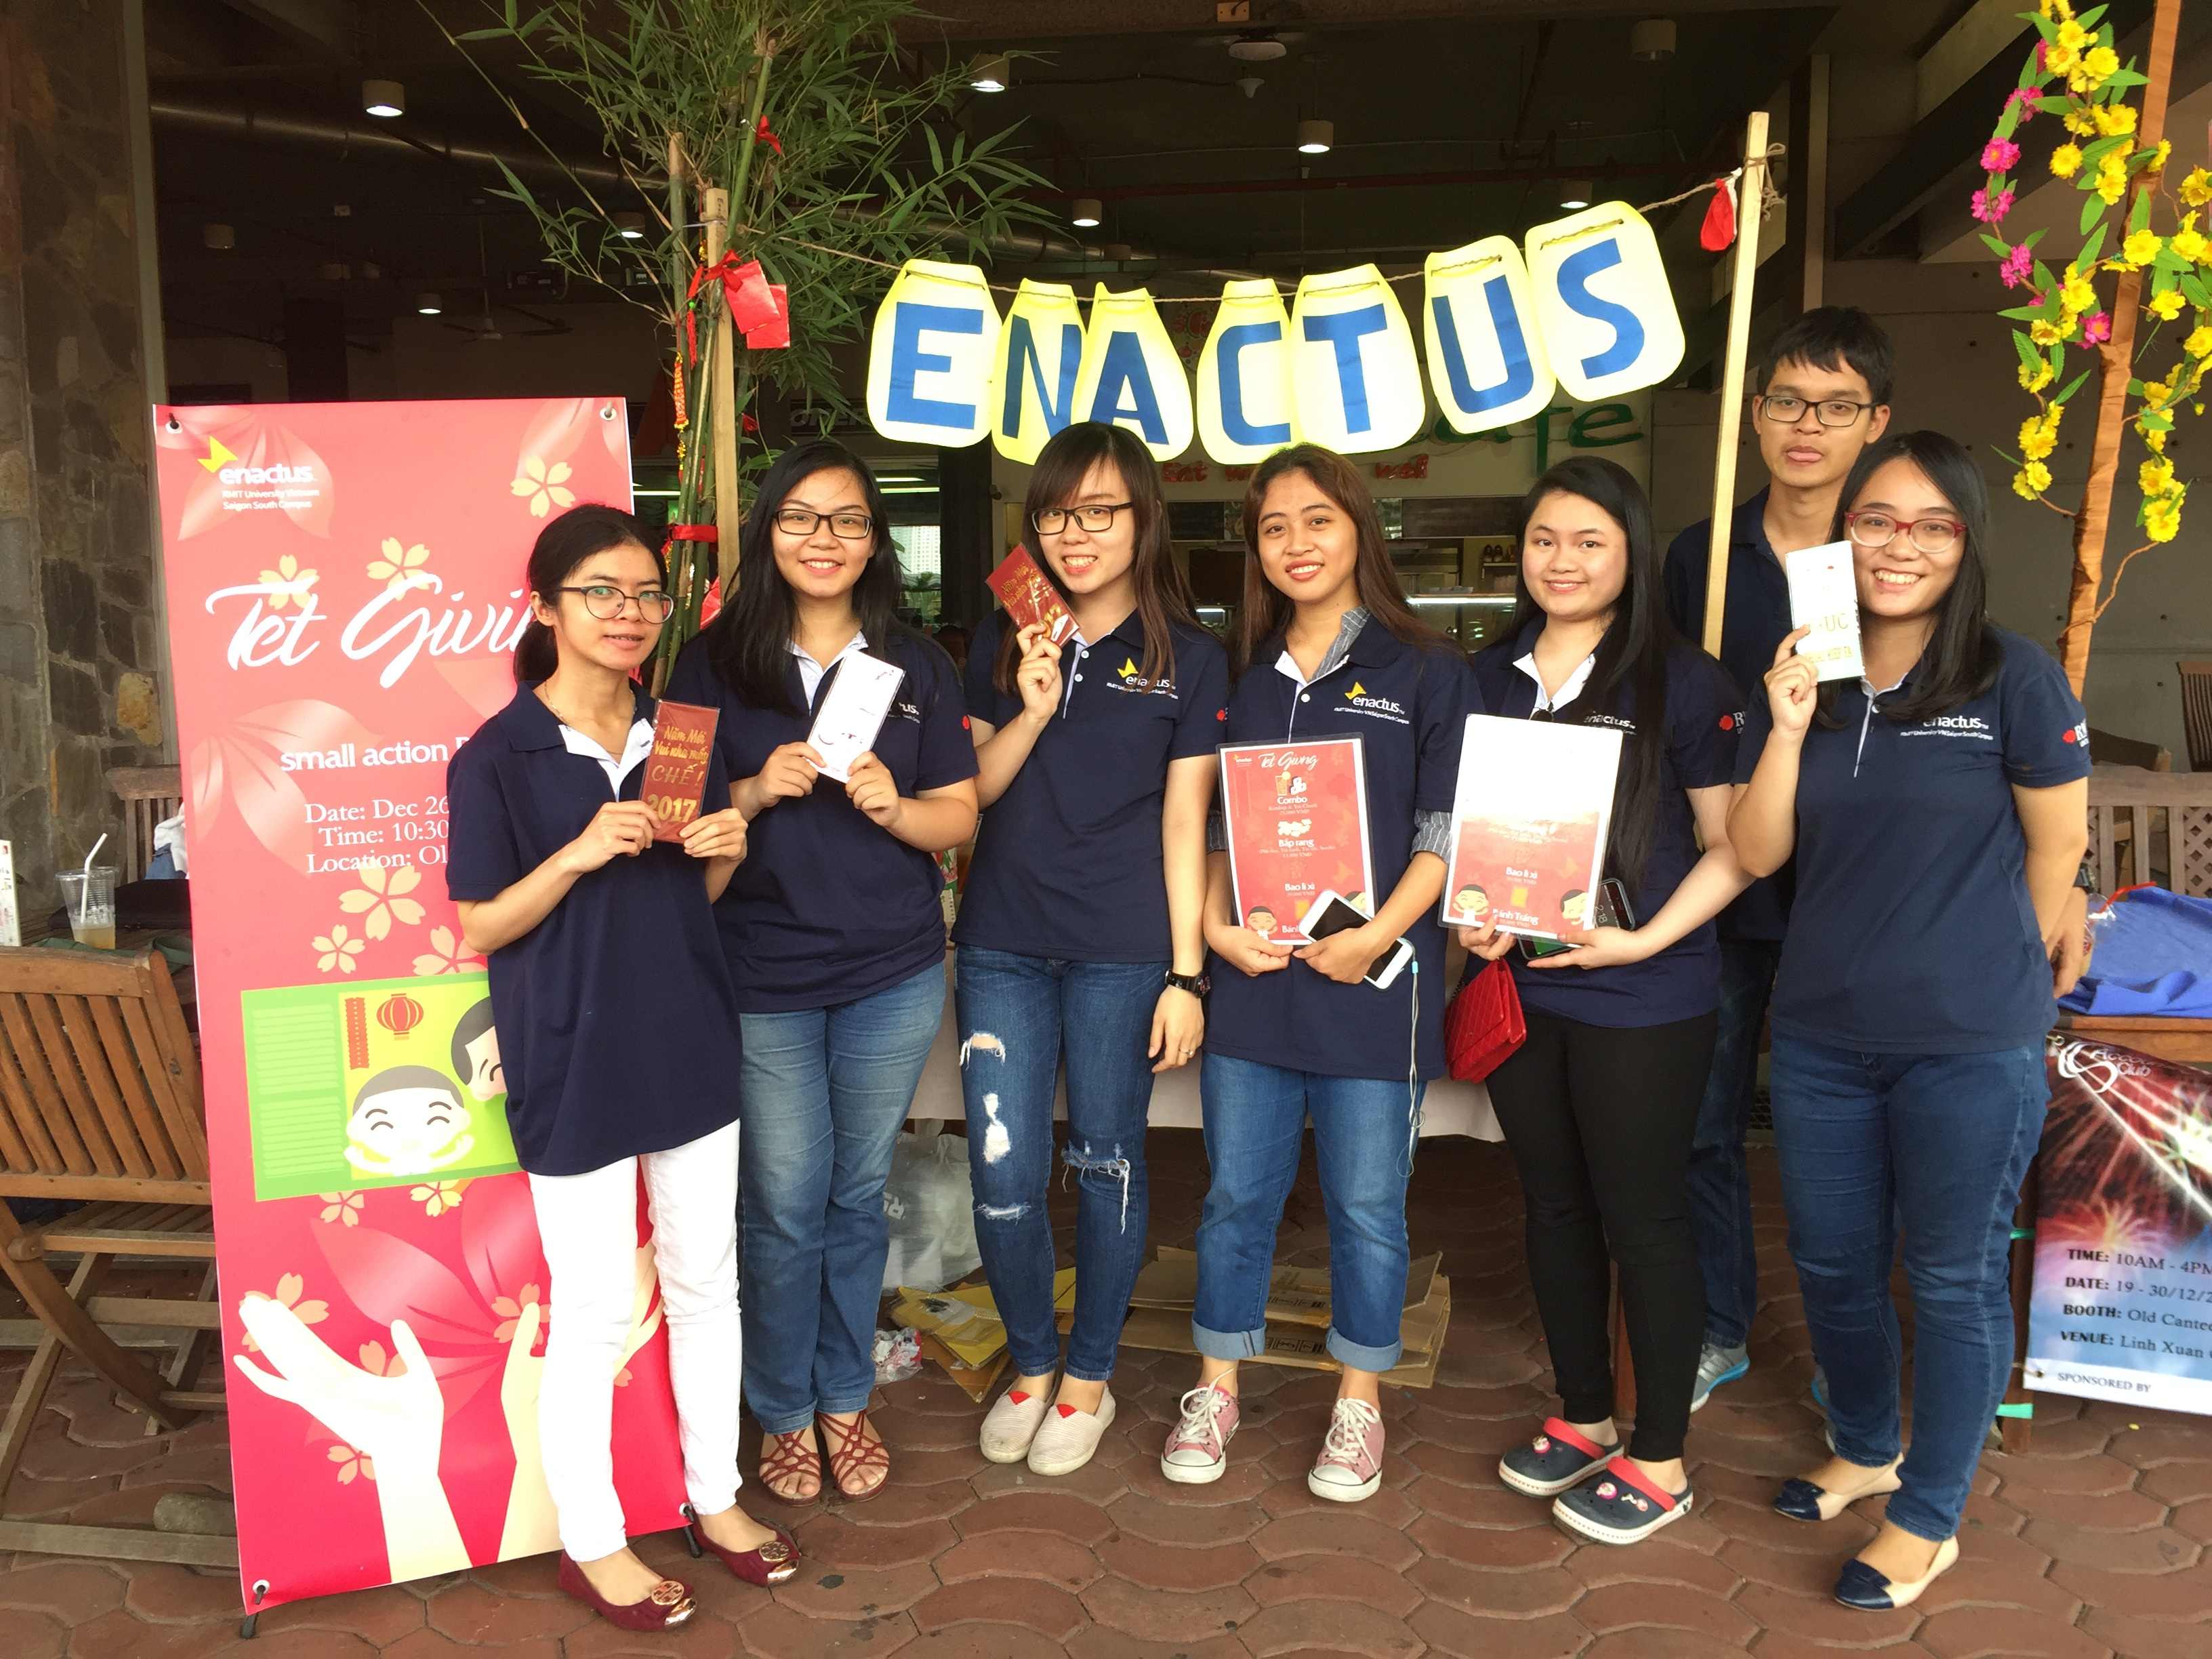 As part of the Tet Giving campaign, the Enactus Club sold New Year cards, red envelopes, and snacks to raise money for disadvantaged children at the Green Bamboo Warm Shelter in Ho Chi Minh City.